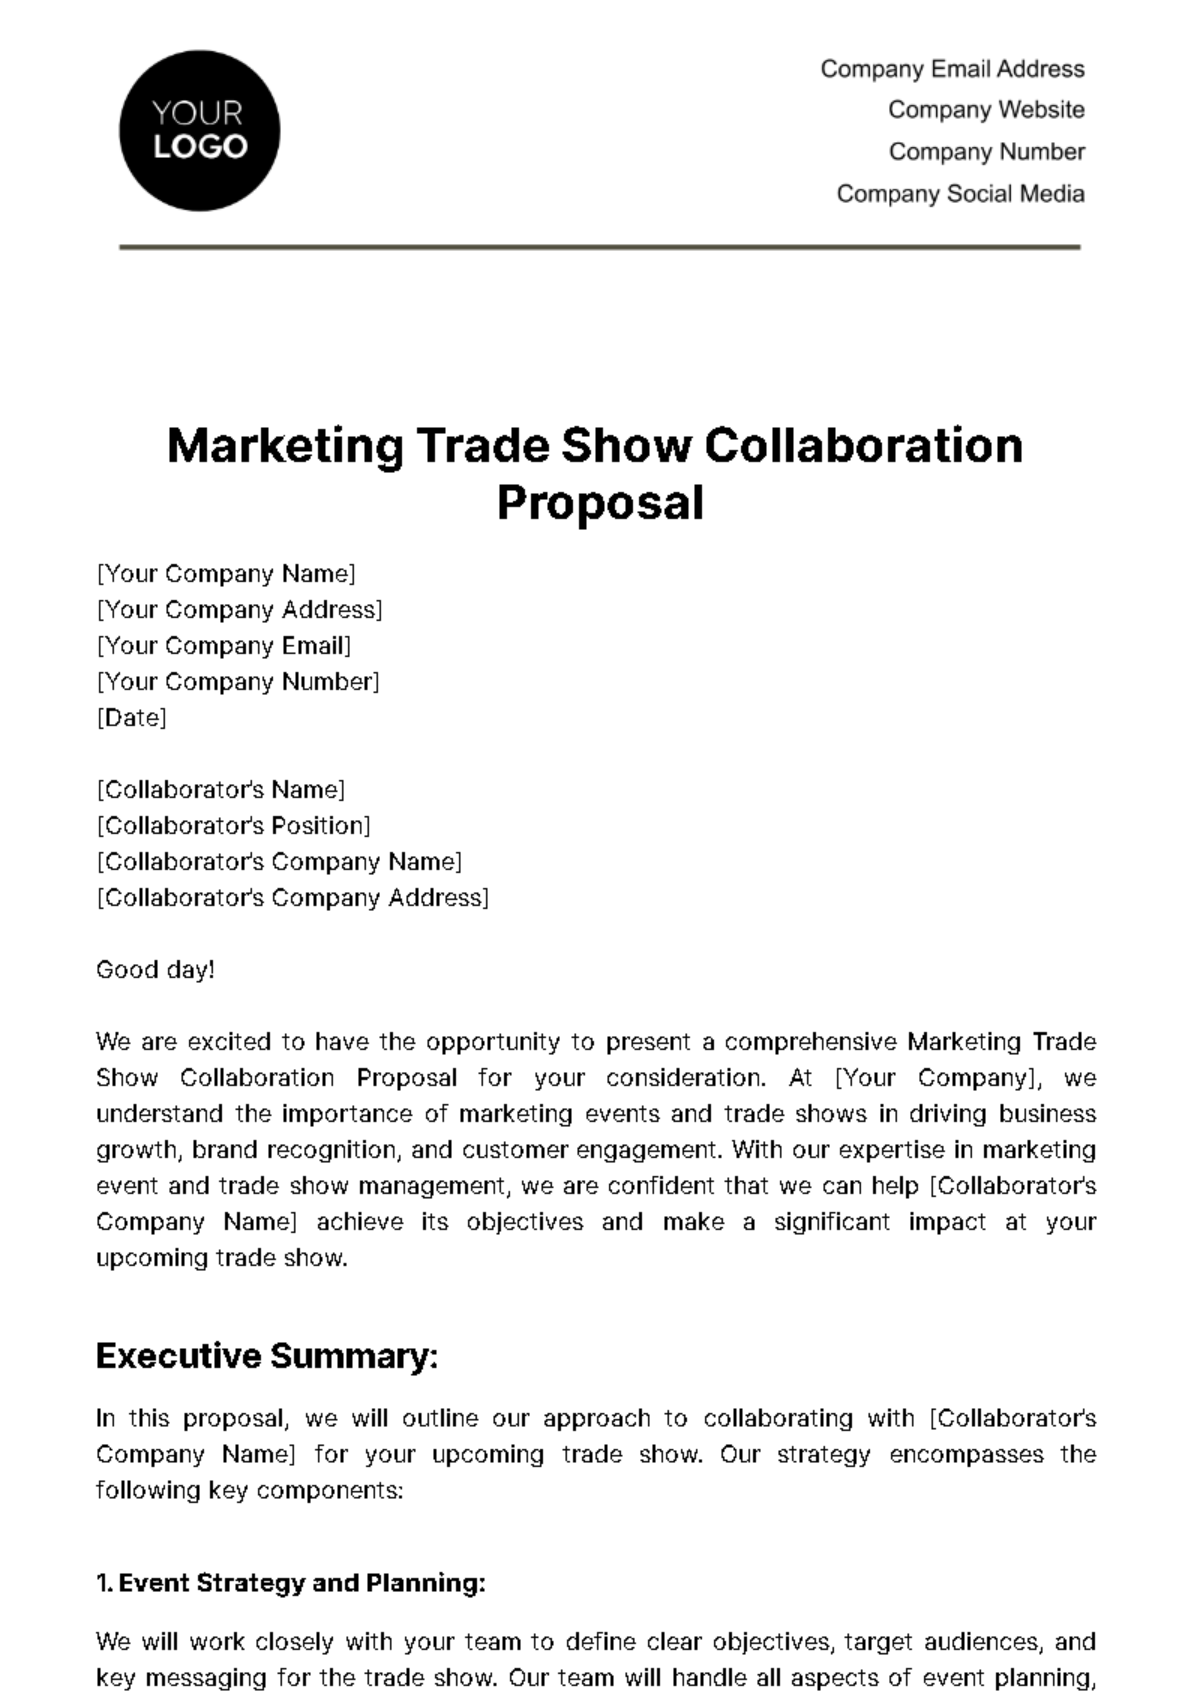 Marketing Trade Show Collaboration Proposal Template